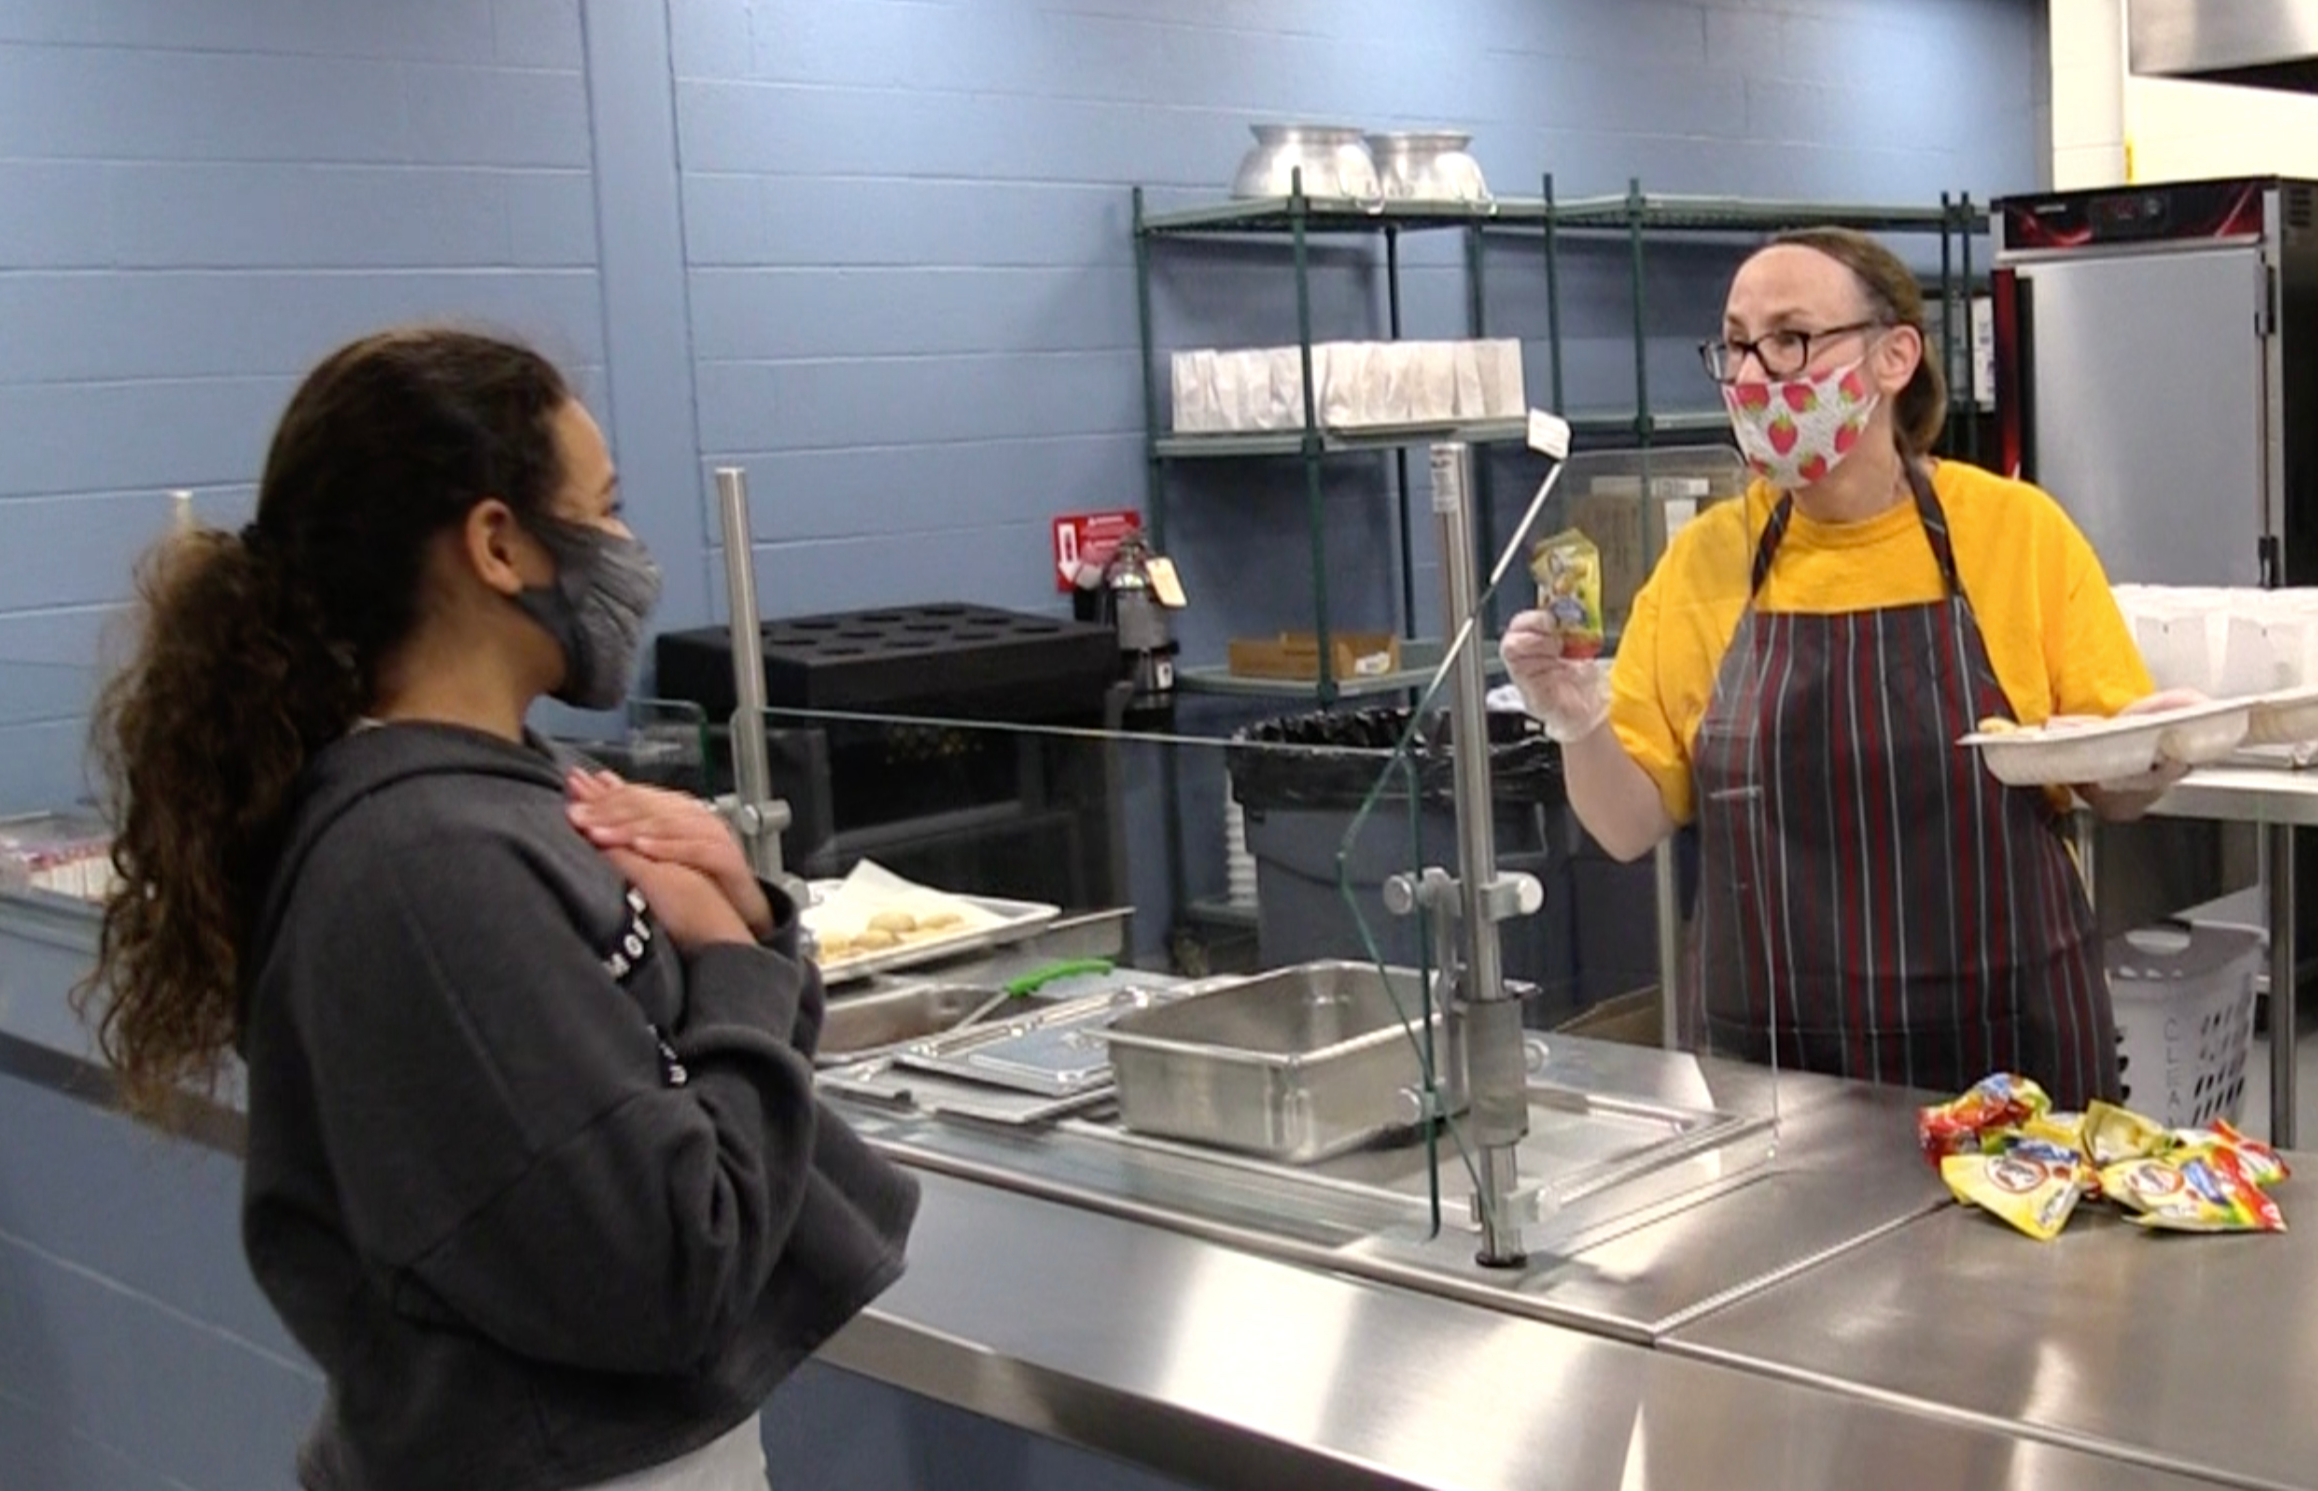 A student is getting food from a nutrition services employee. The student is holding her hands over her heart to thank the  employee for serving the meal to her.